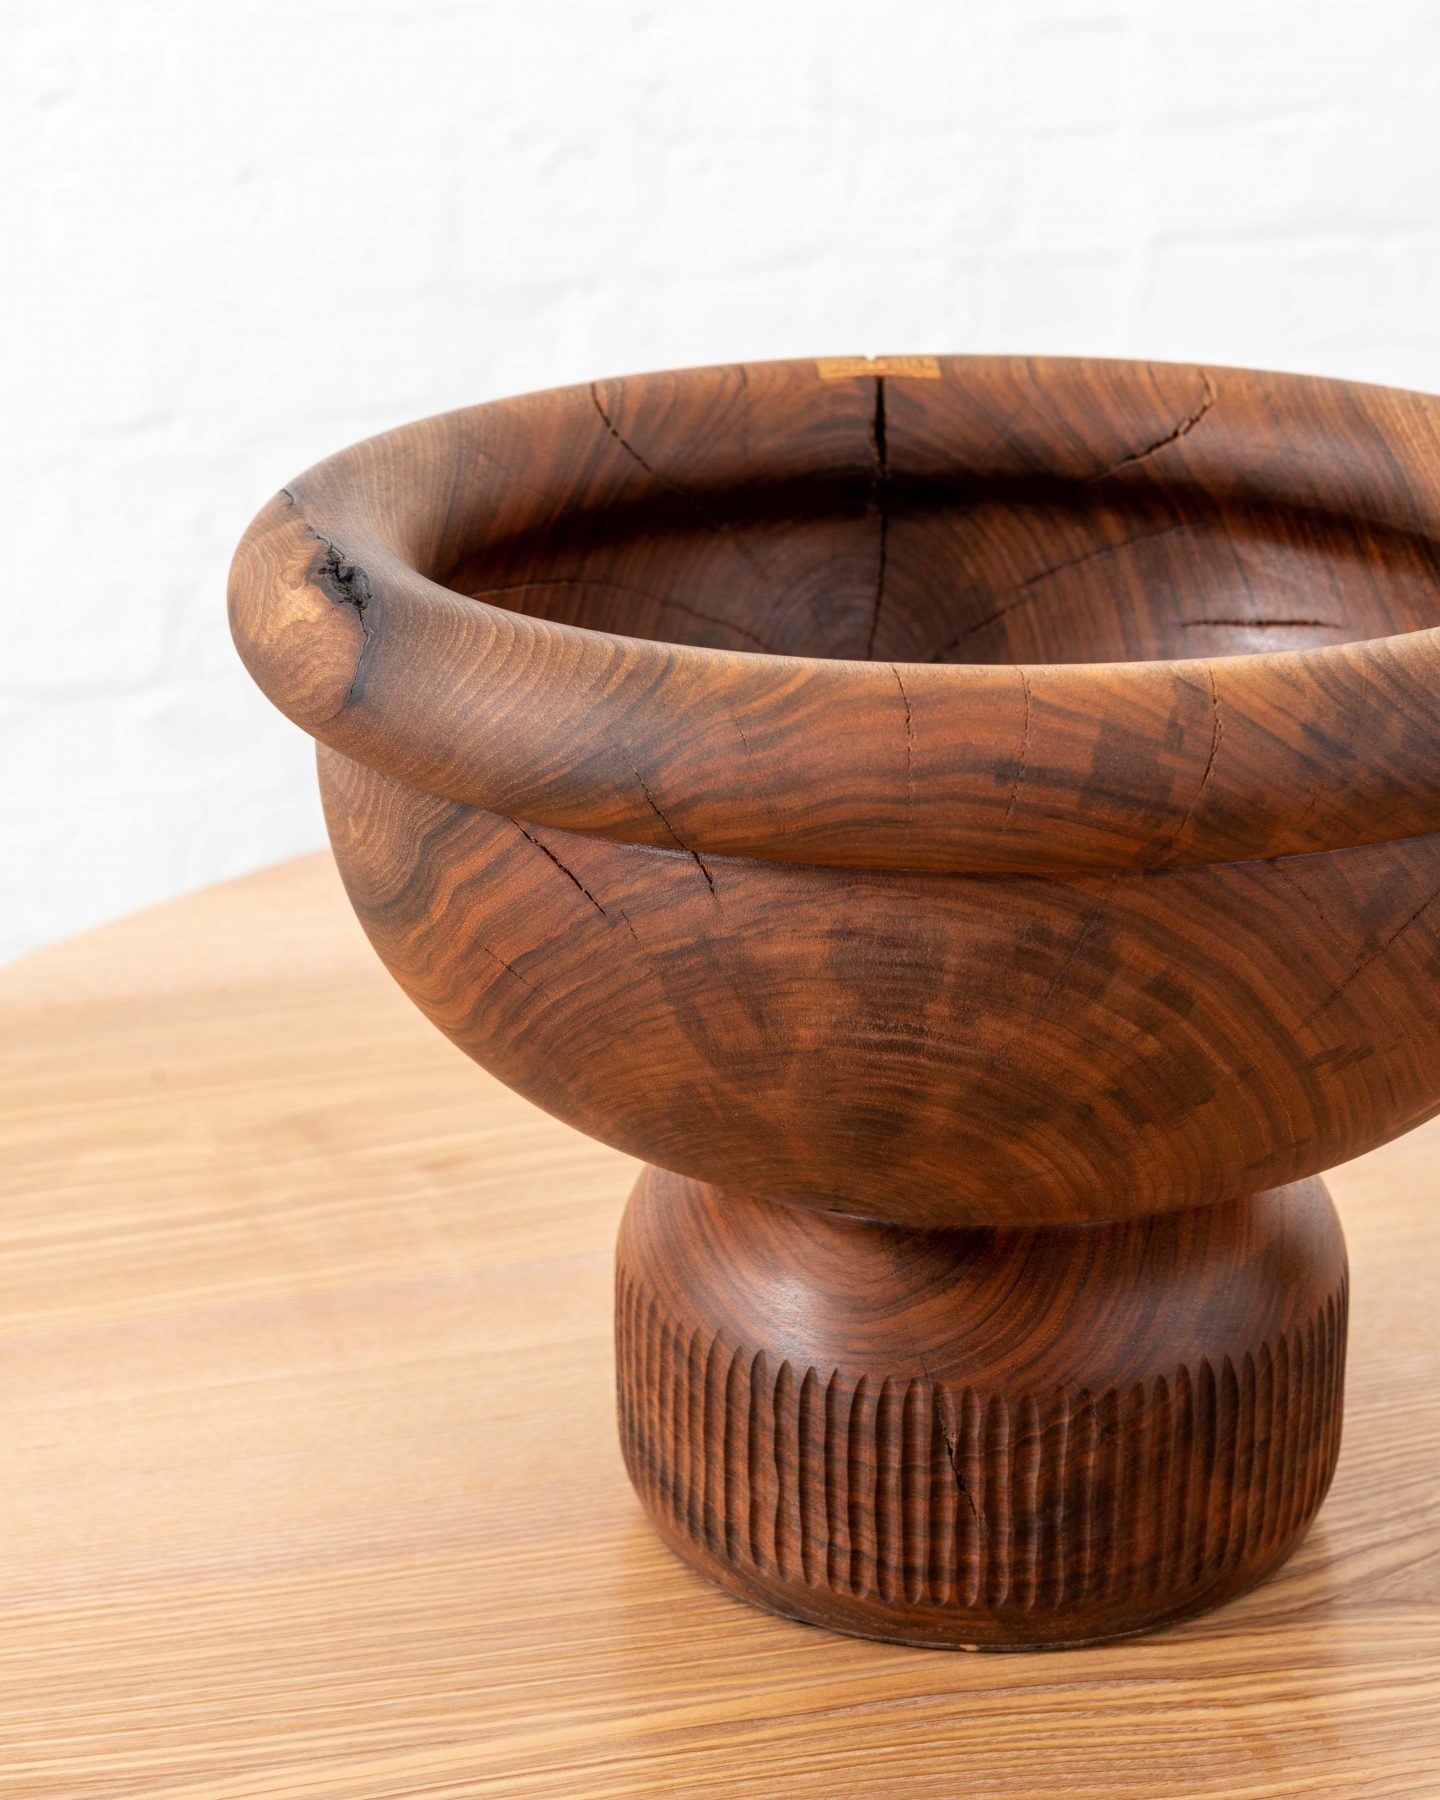 One Legger, Turned and hand carved vessel from a single piece of English walnut. rare timber comes from Dog kennel hill, Camberwell, London. Elm dovetail keys have been utilised to tie the object together.